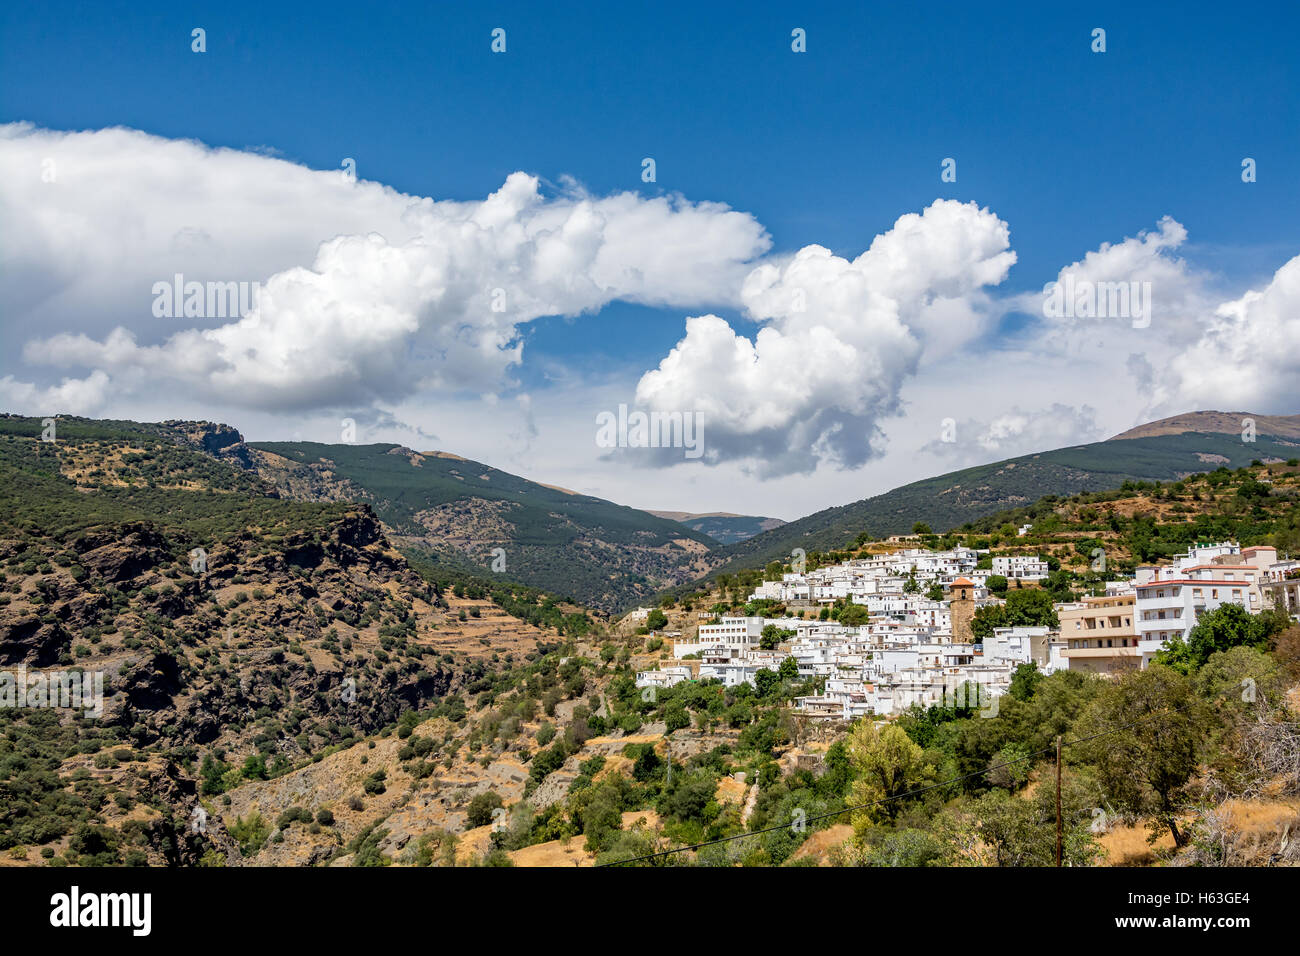 View of Bayárcal, the highest located town in Sierra Nevada with picturesque mountains, Almería region, Spain Stock Photo